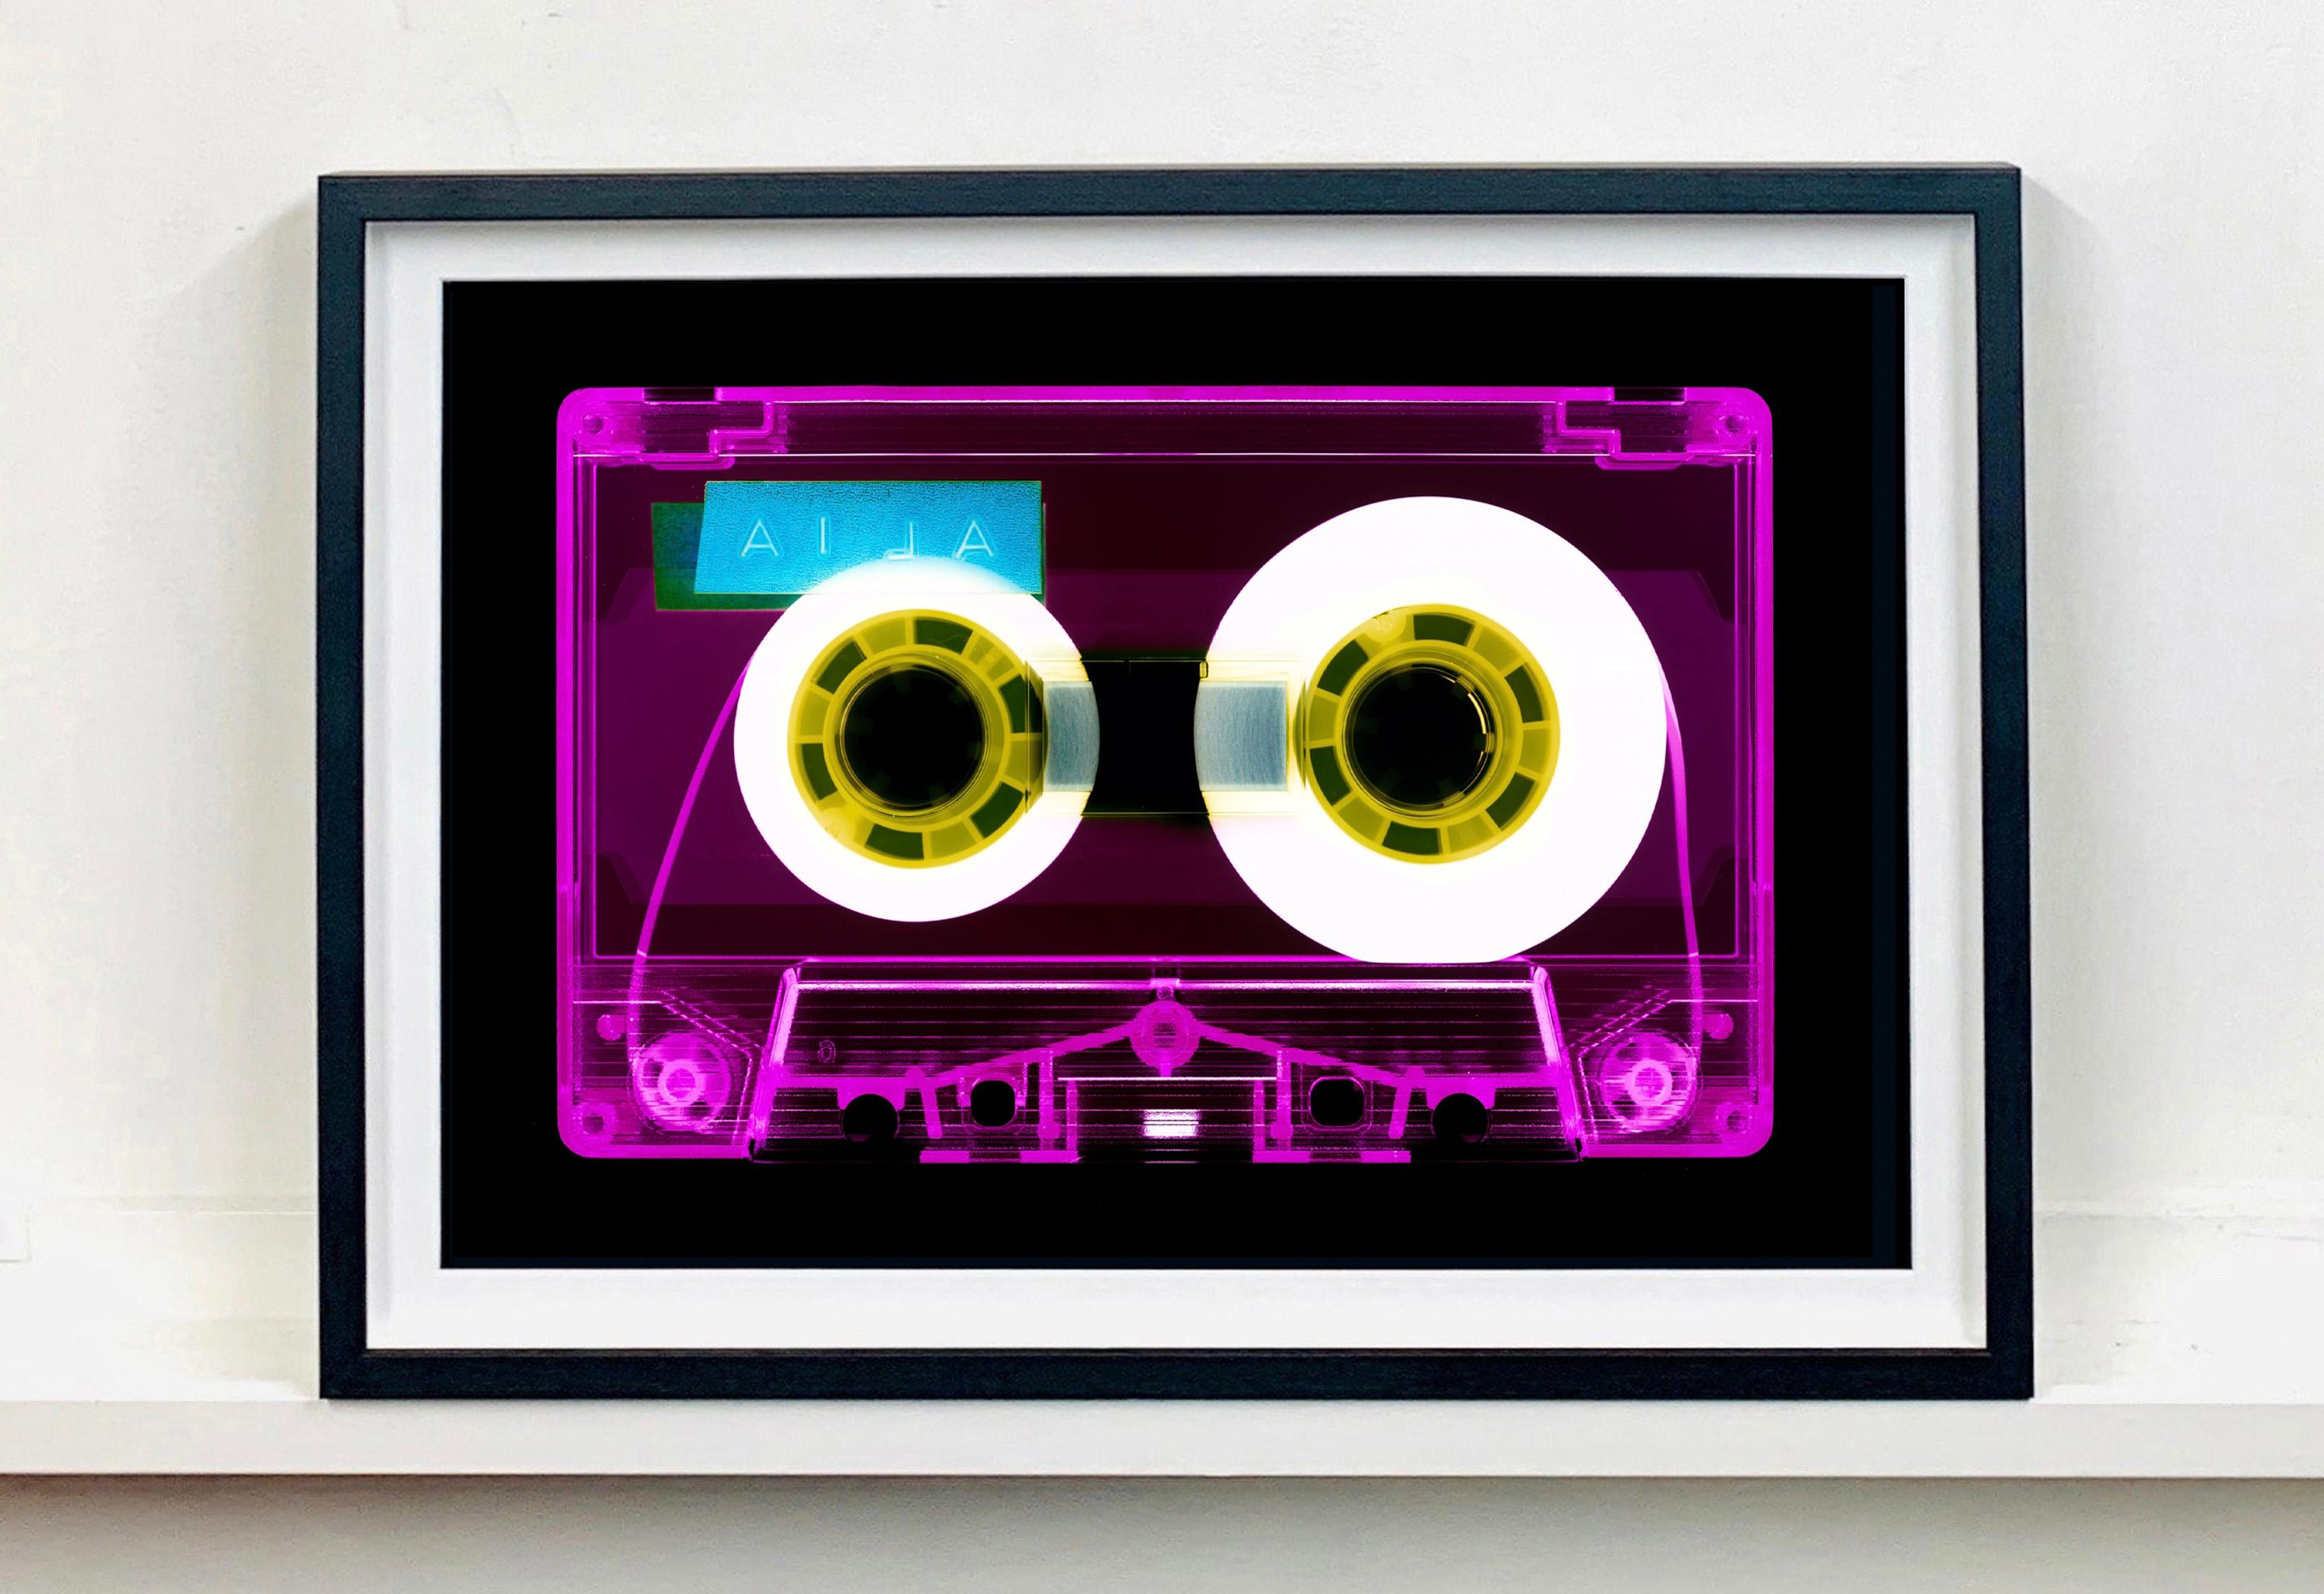 Tape Collection, AILA (Pink) - Contemporary Pop Art Color Photography - Print by Heidler & Heeps